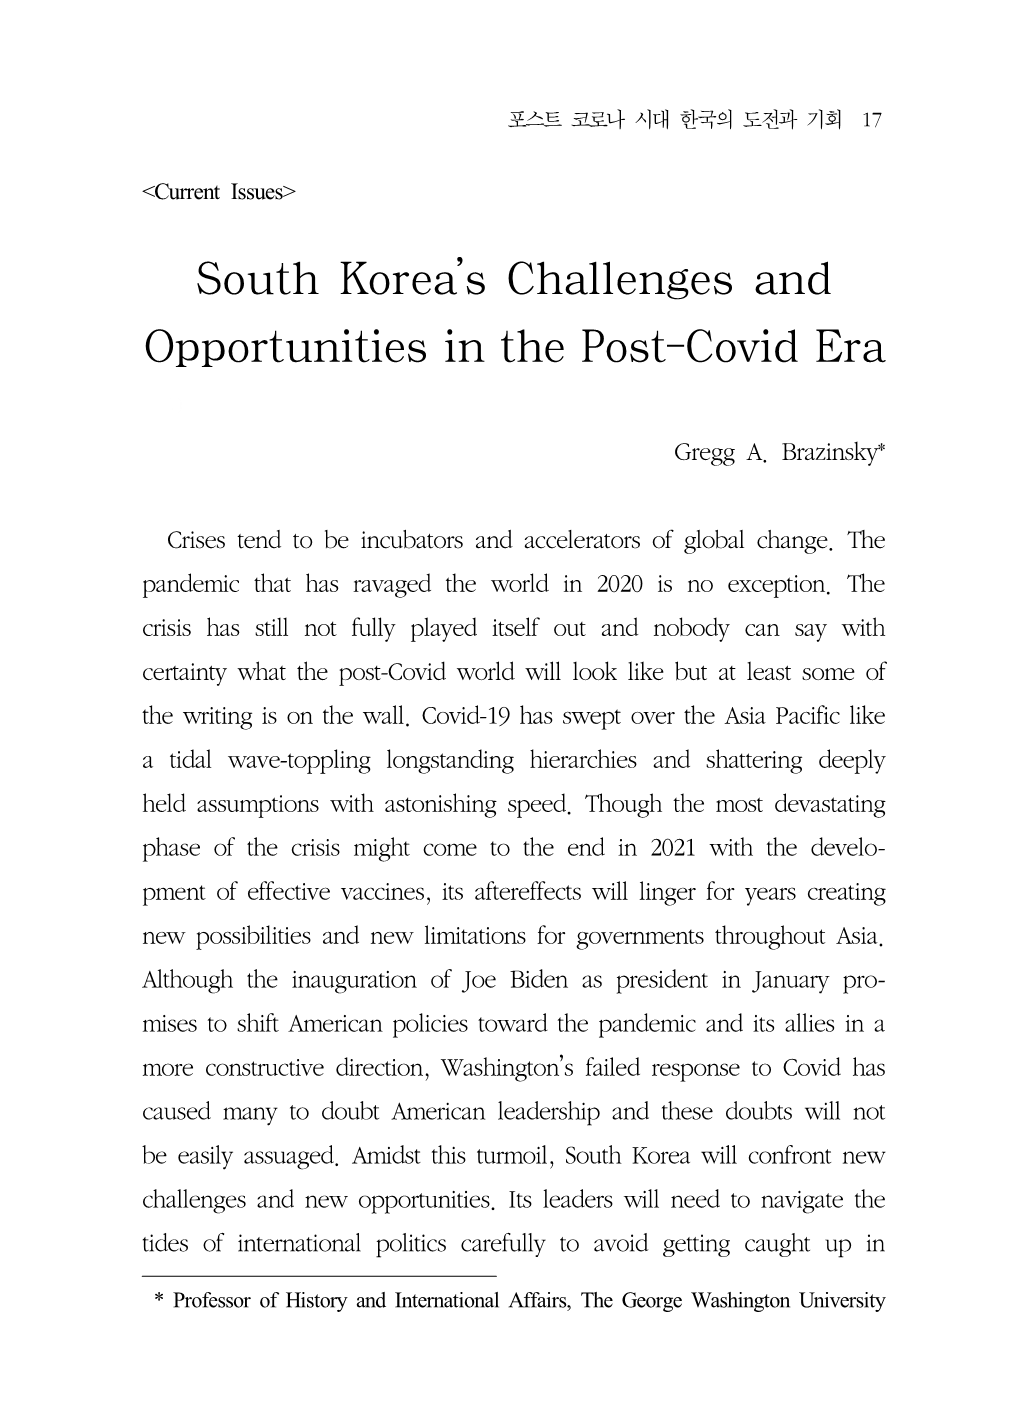 South Korea's Challenges and Opportunities in the Post-Covid